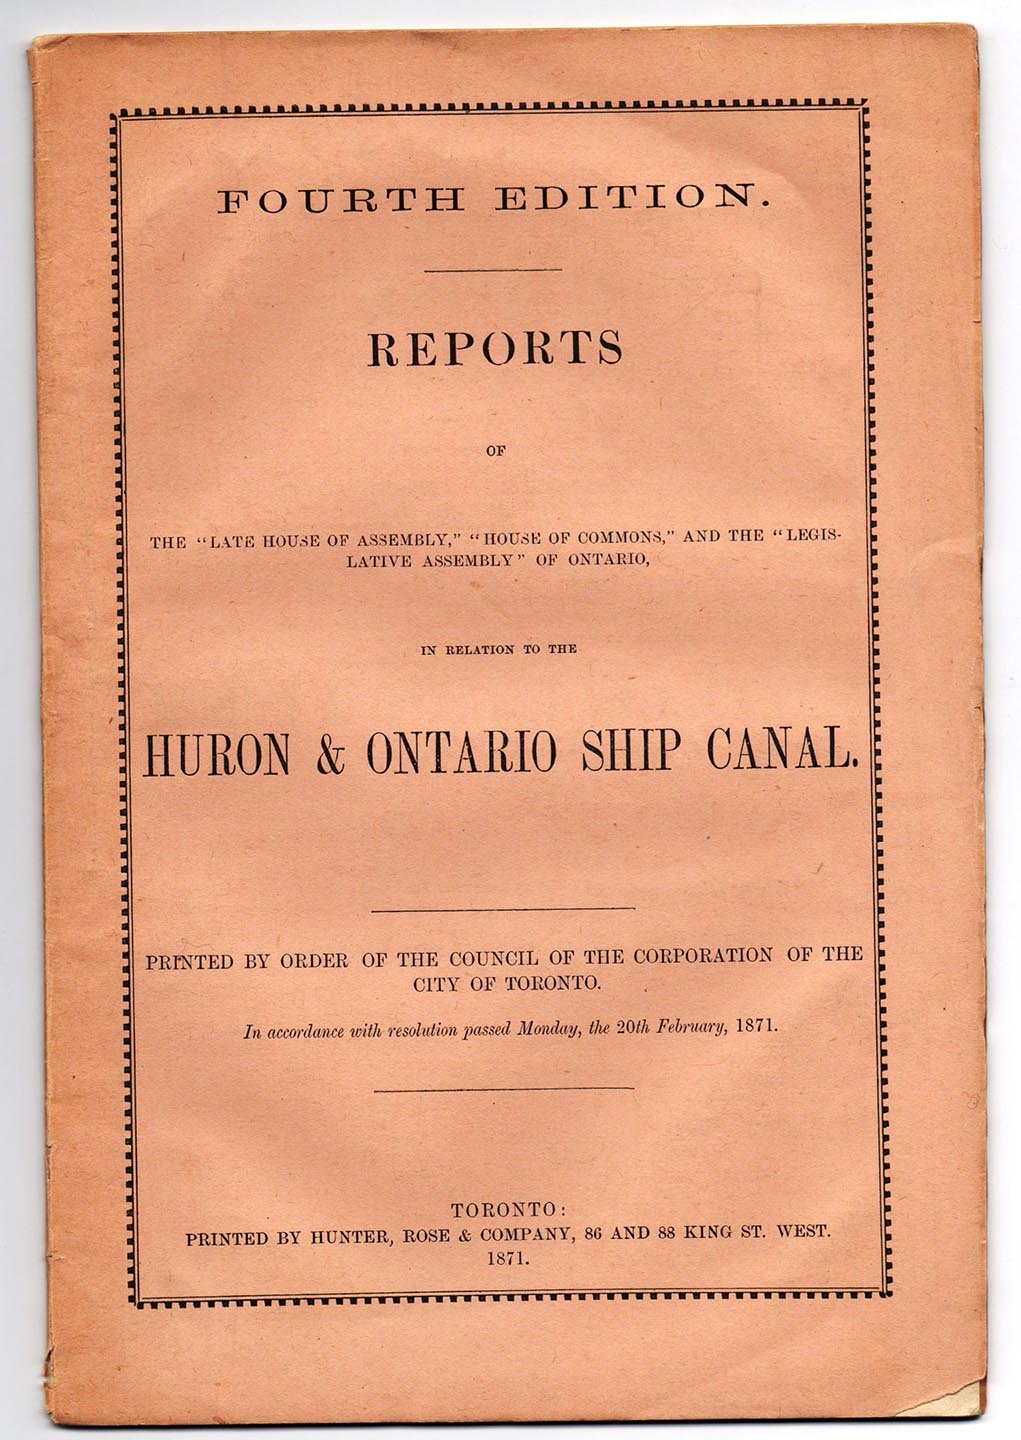 Reports of the "Late House of Assembly", "House of Commons", and the "Legislative Assembly" of Ontario, in Relation to the Huron & Ontario Ship Canal